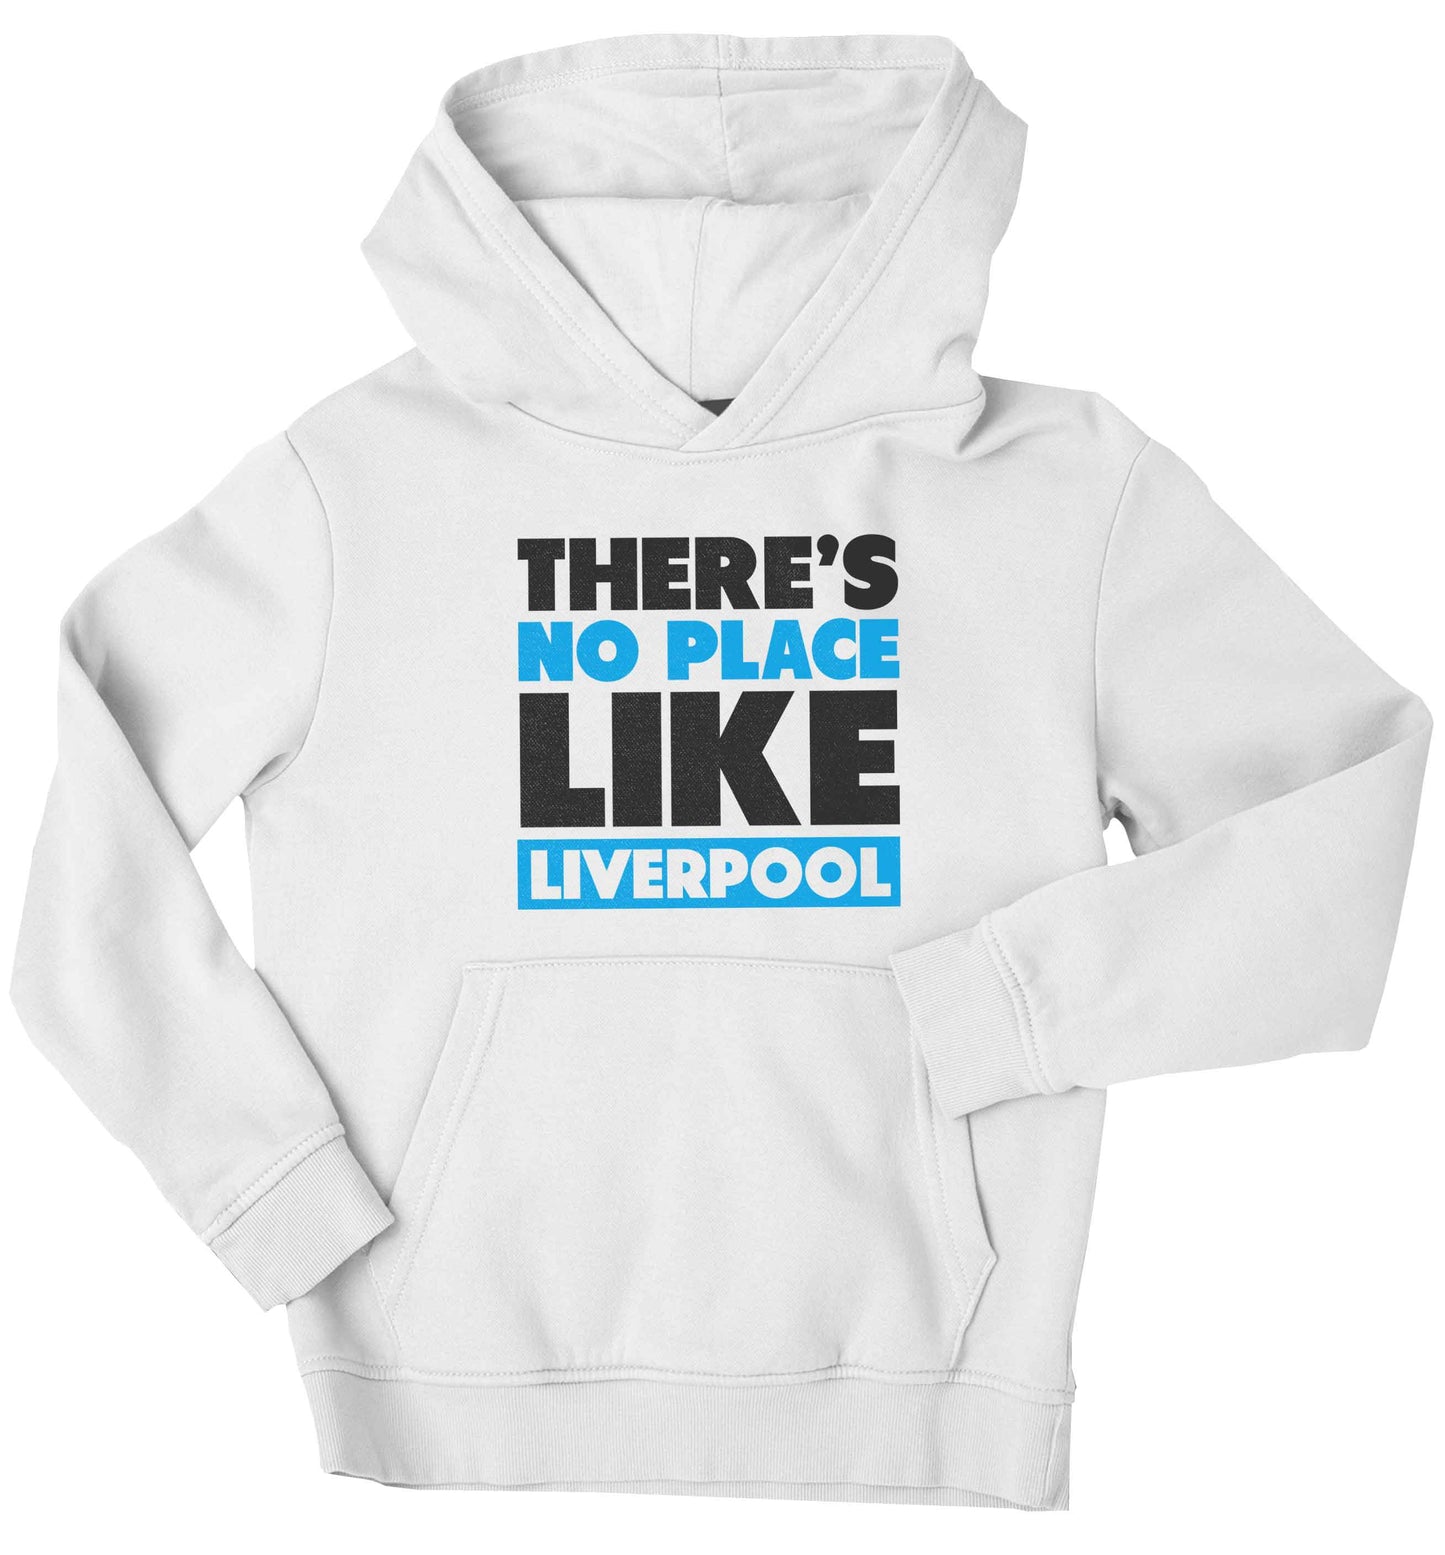 There's no place like Liverpool children's white hoodie 12-13 Years